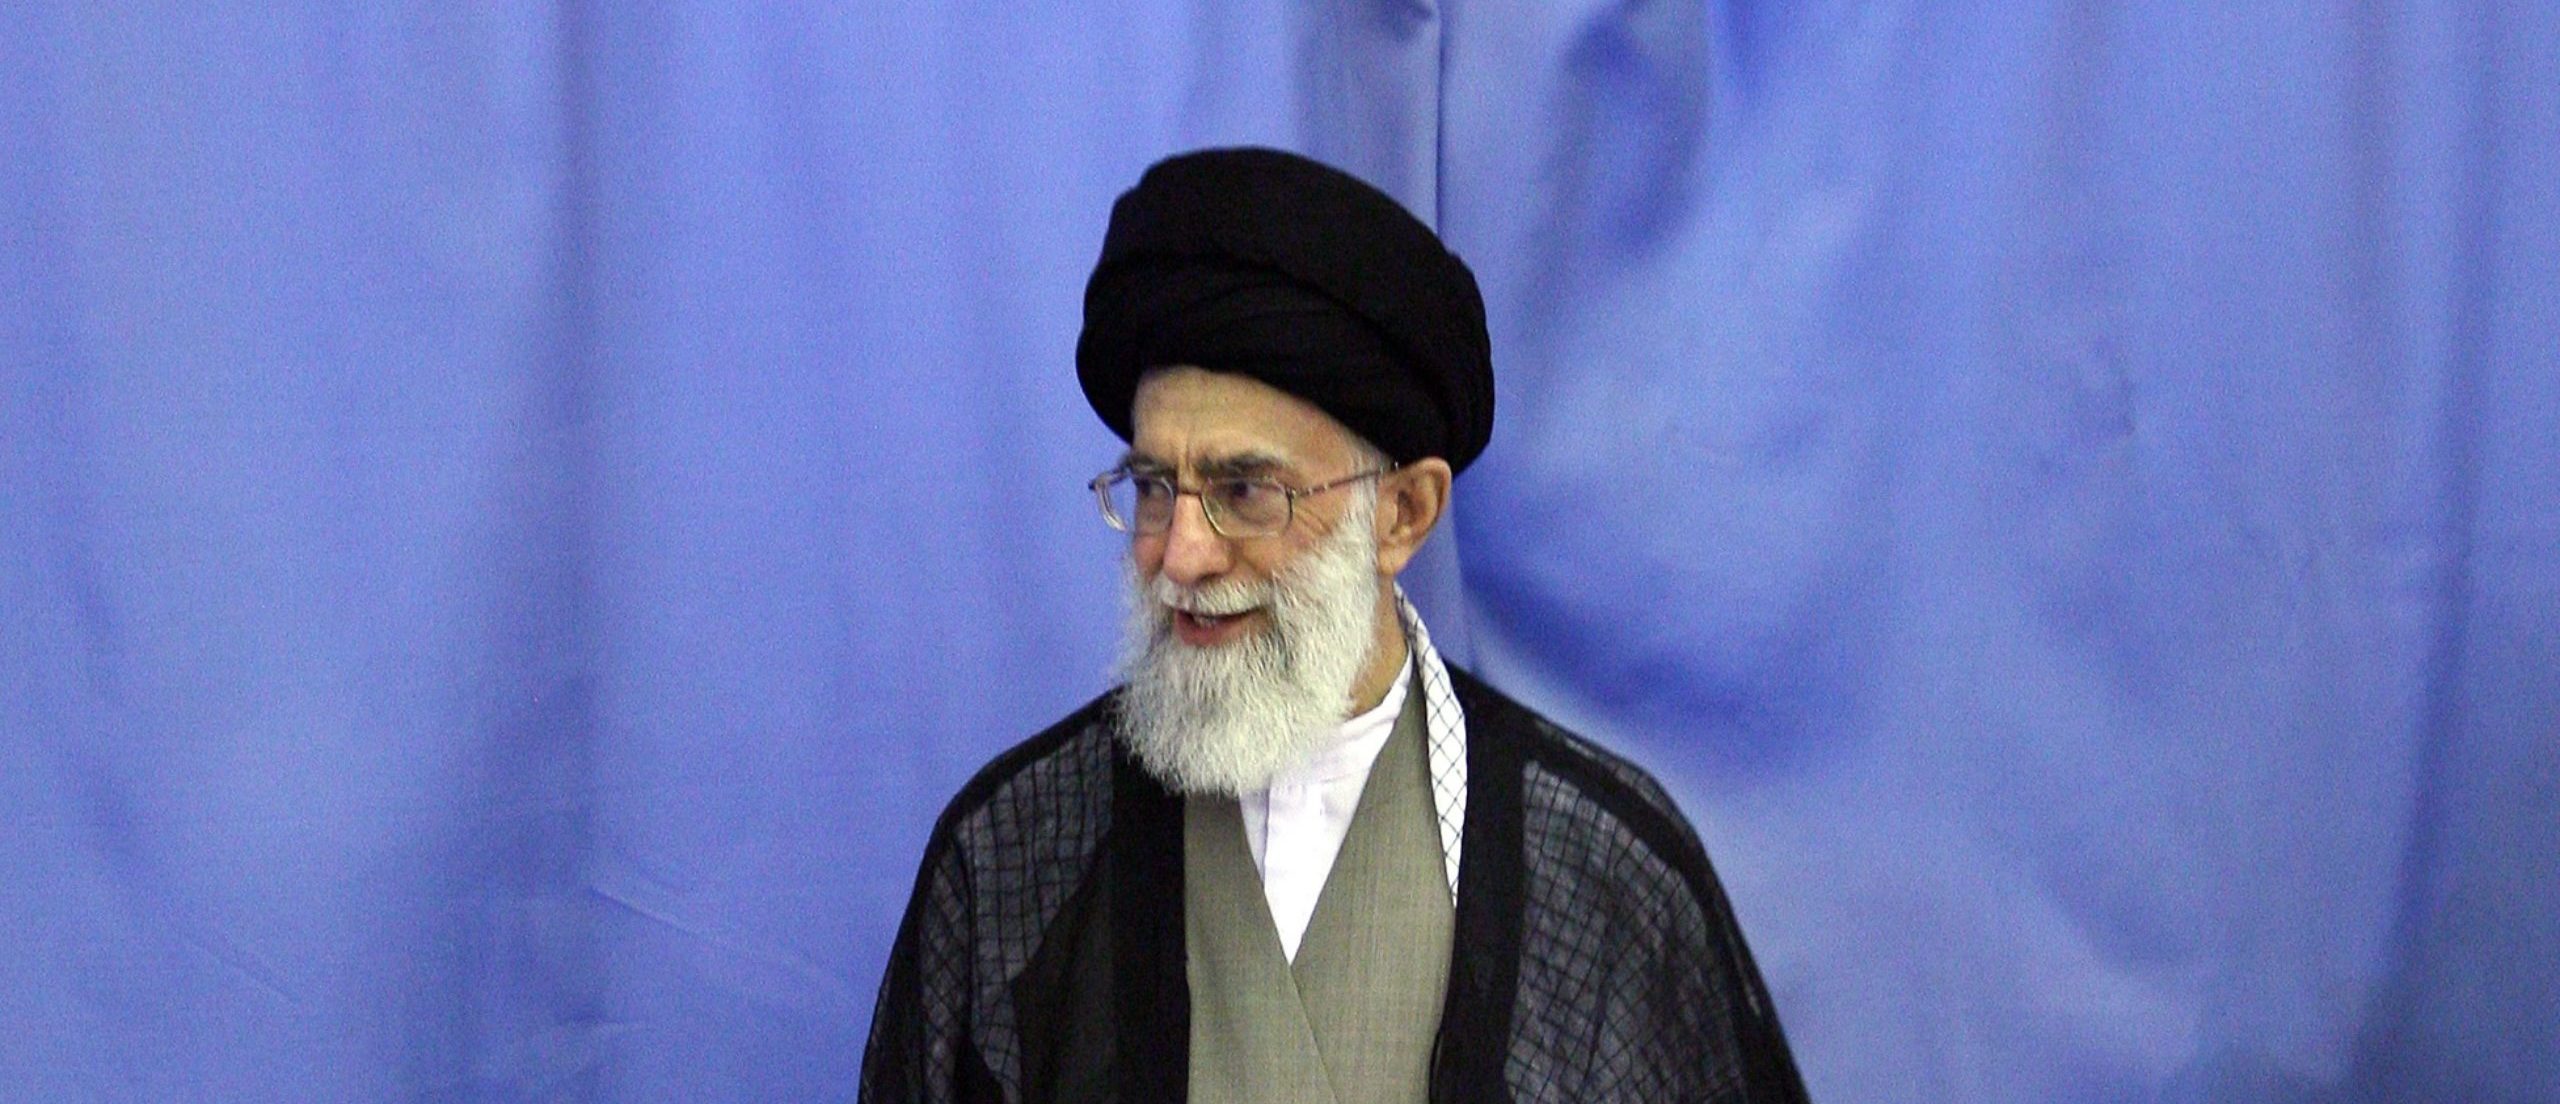 REPORT: Twitter Suspends Fake Account Of Iran Supreme Leader After It Called For An Attack On Trump